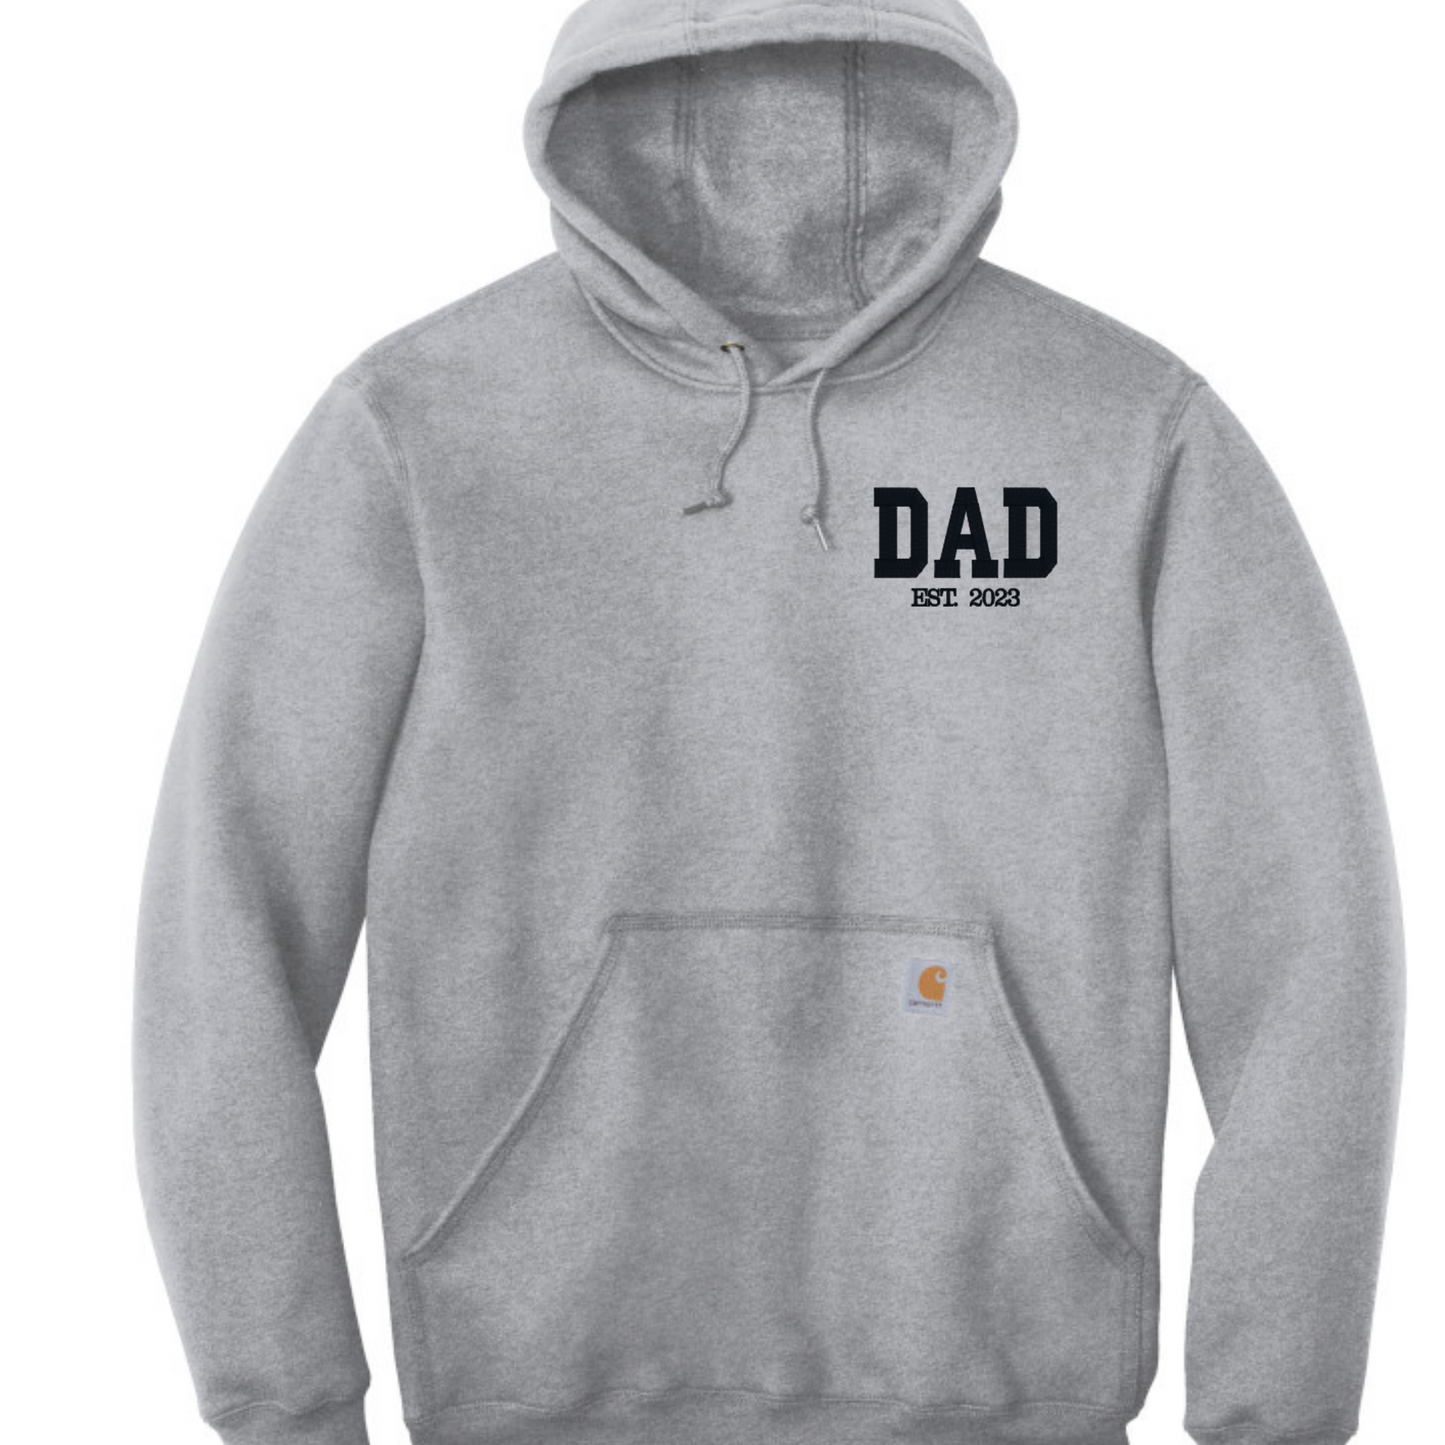 Carhartt DAD hoodie Embroidered, with Initials on sleeve